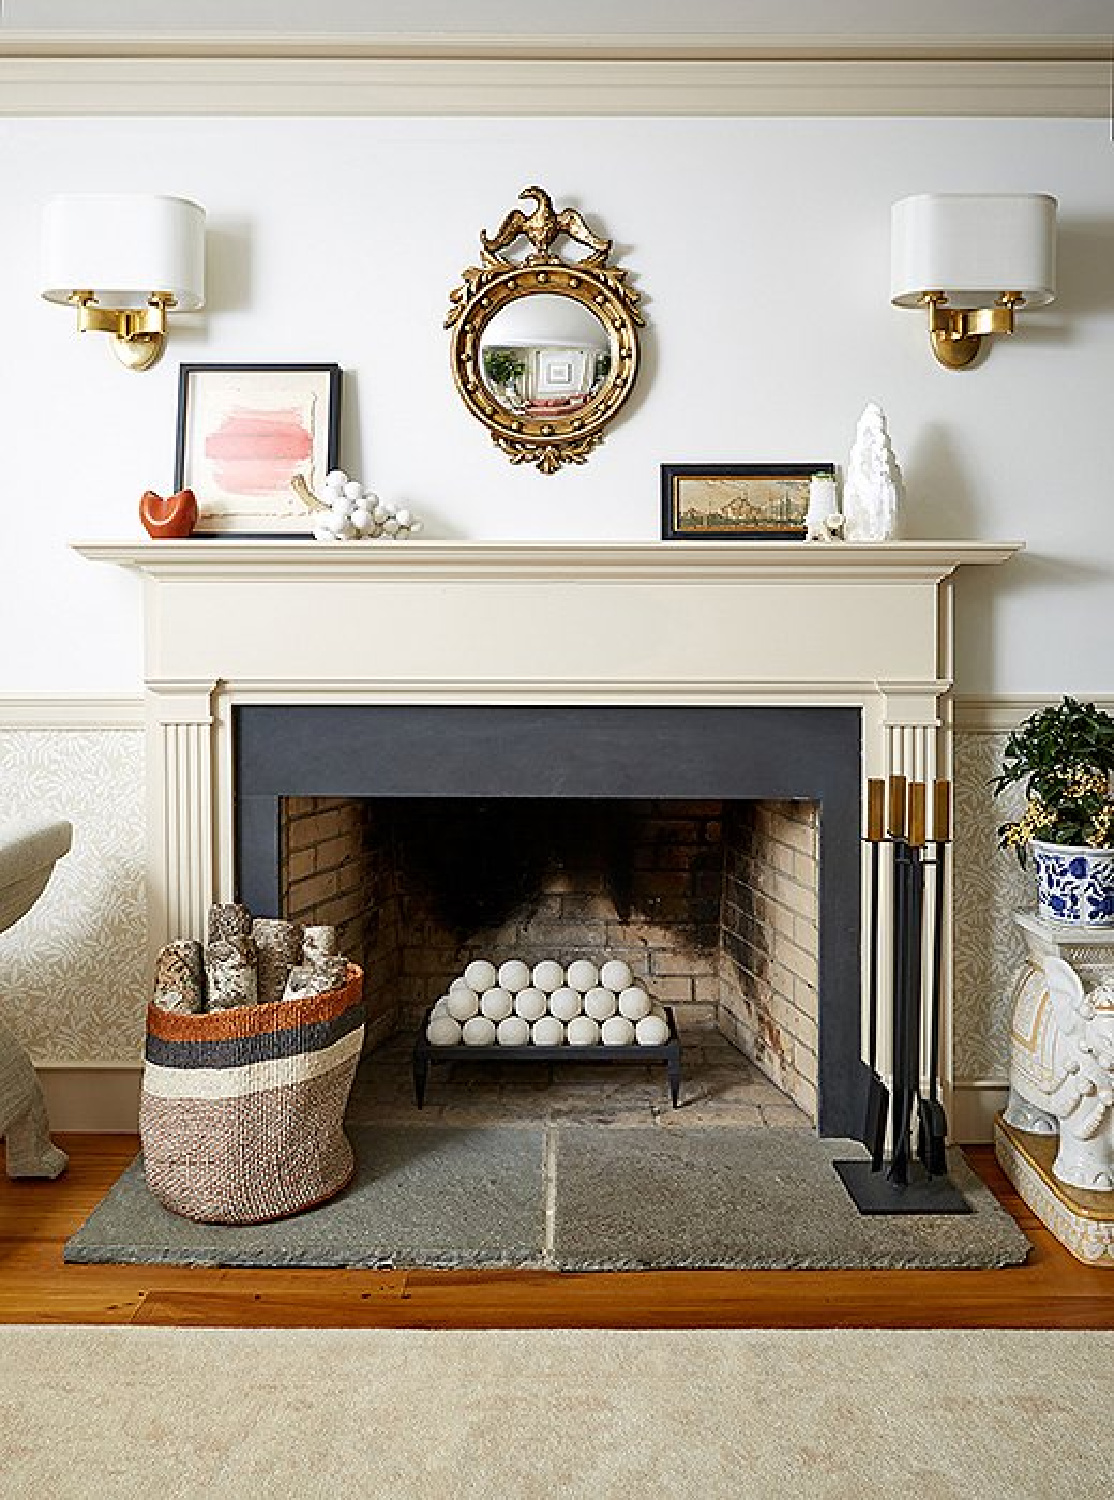 Detail of fireplace with fire spheres and classic interior design in a New England farmhouse - OKL.